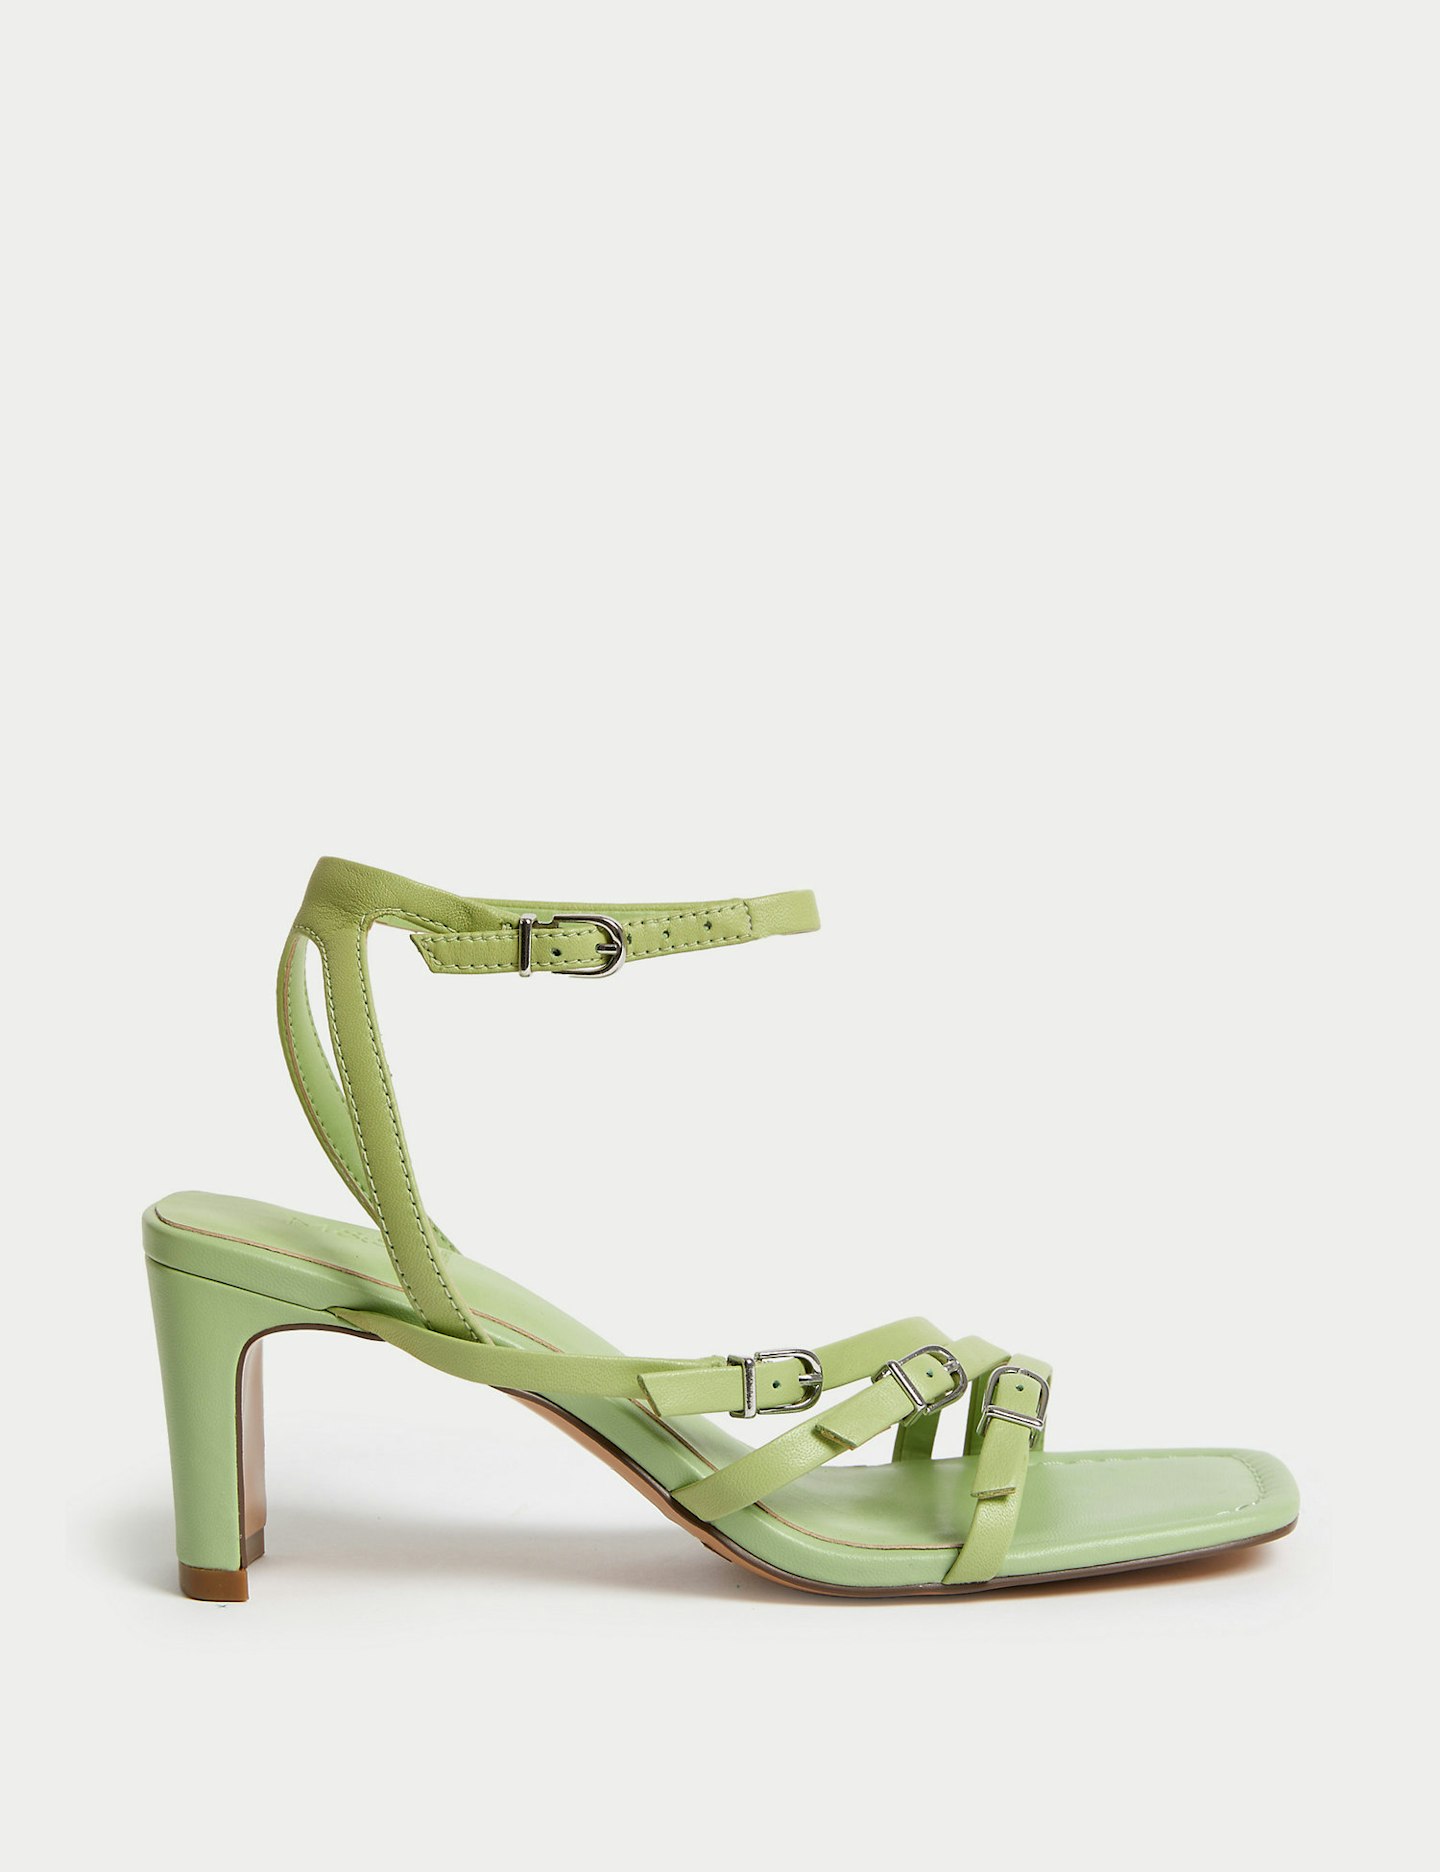 M&S Leather Buckle Strappy Block Heel Sandals